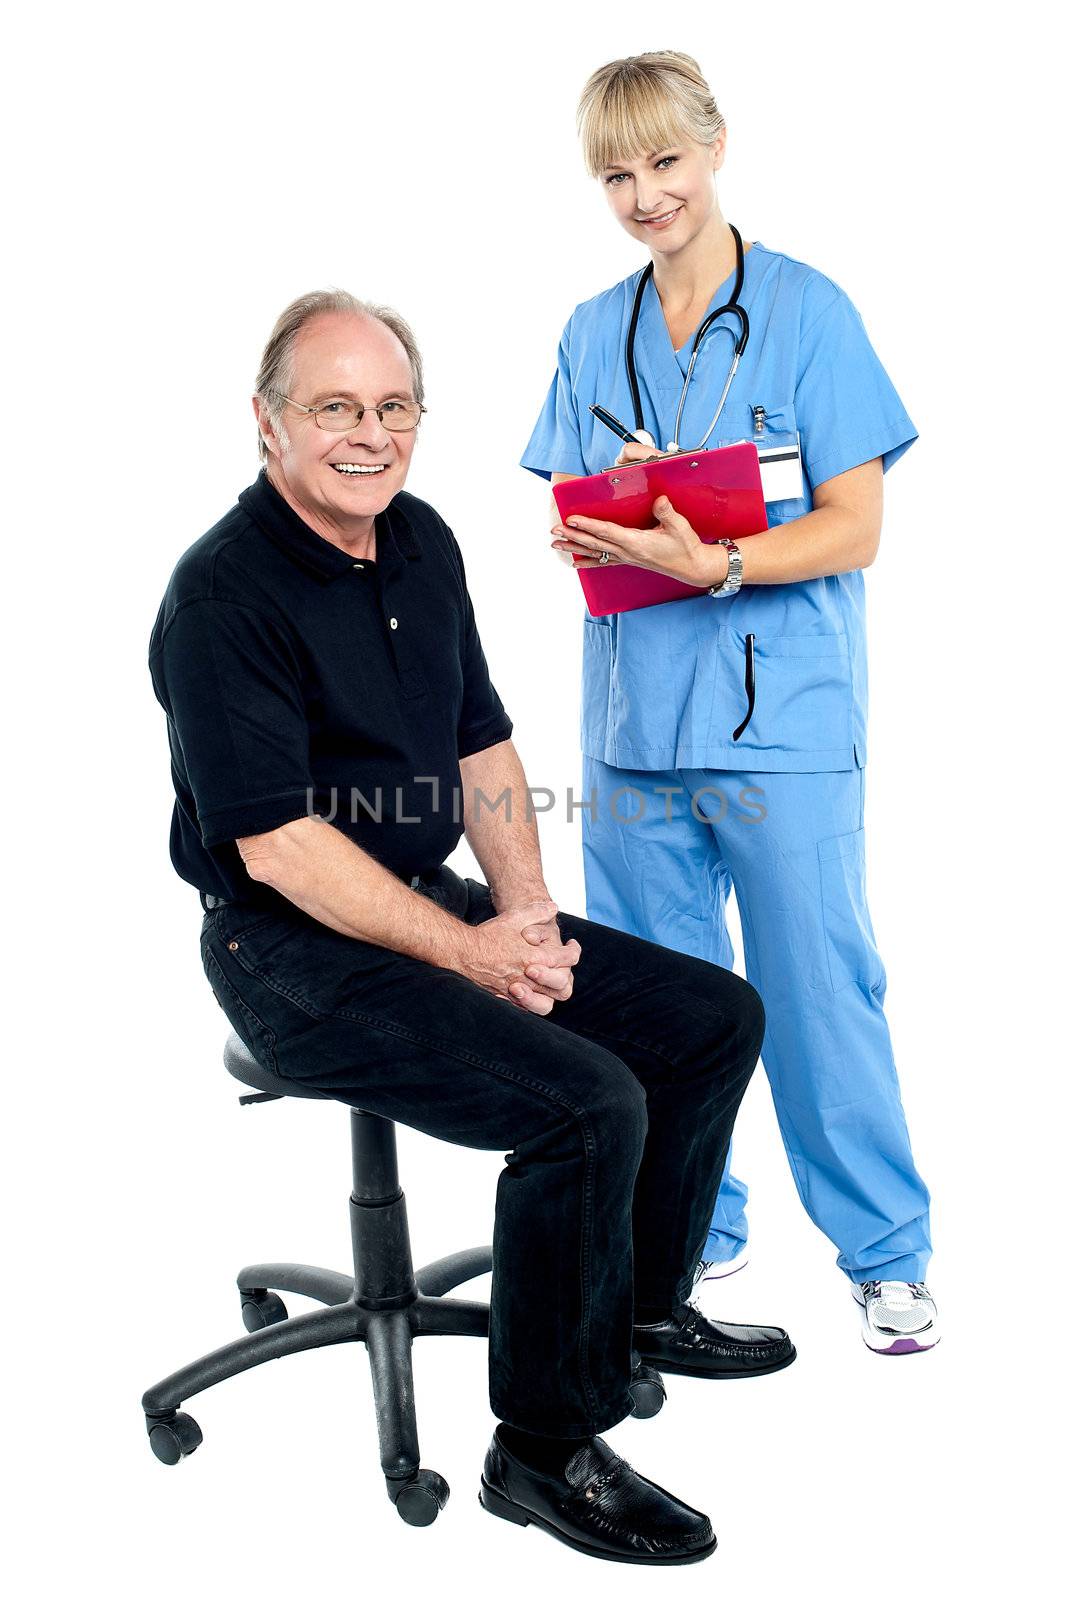 Pleasing doctor collecting patient's health history before annual check up.